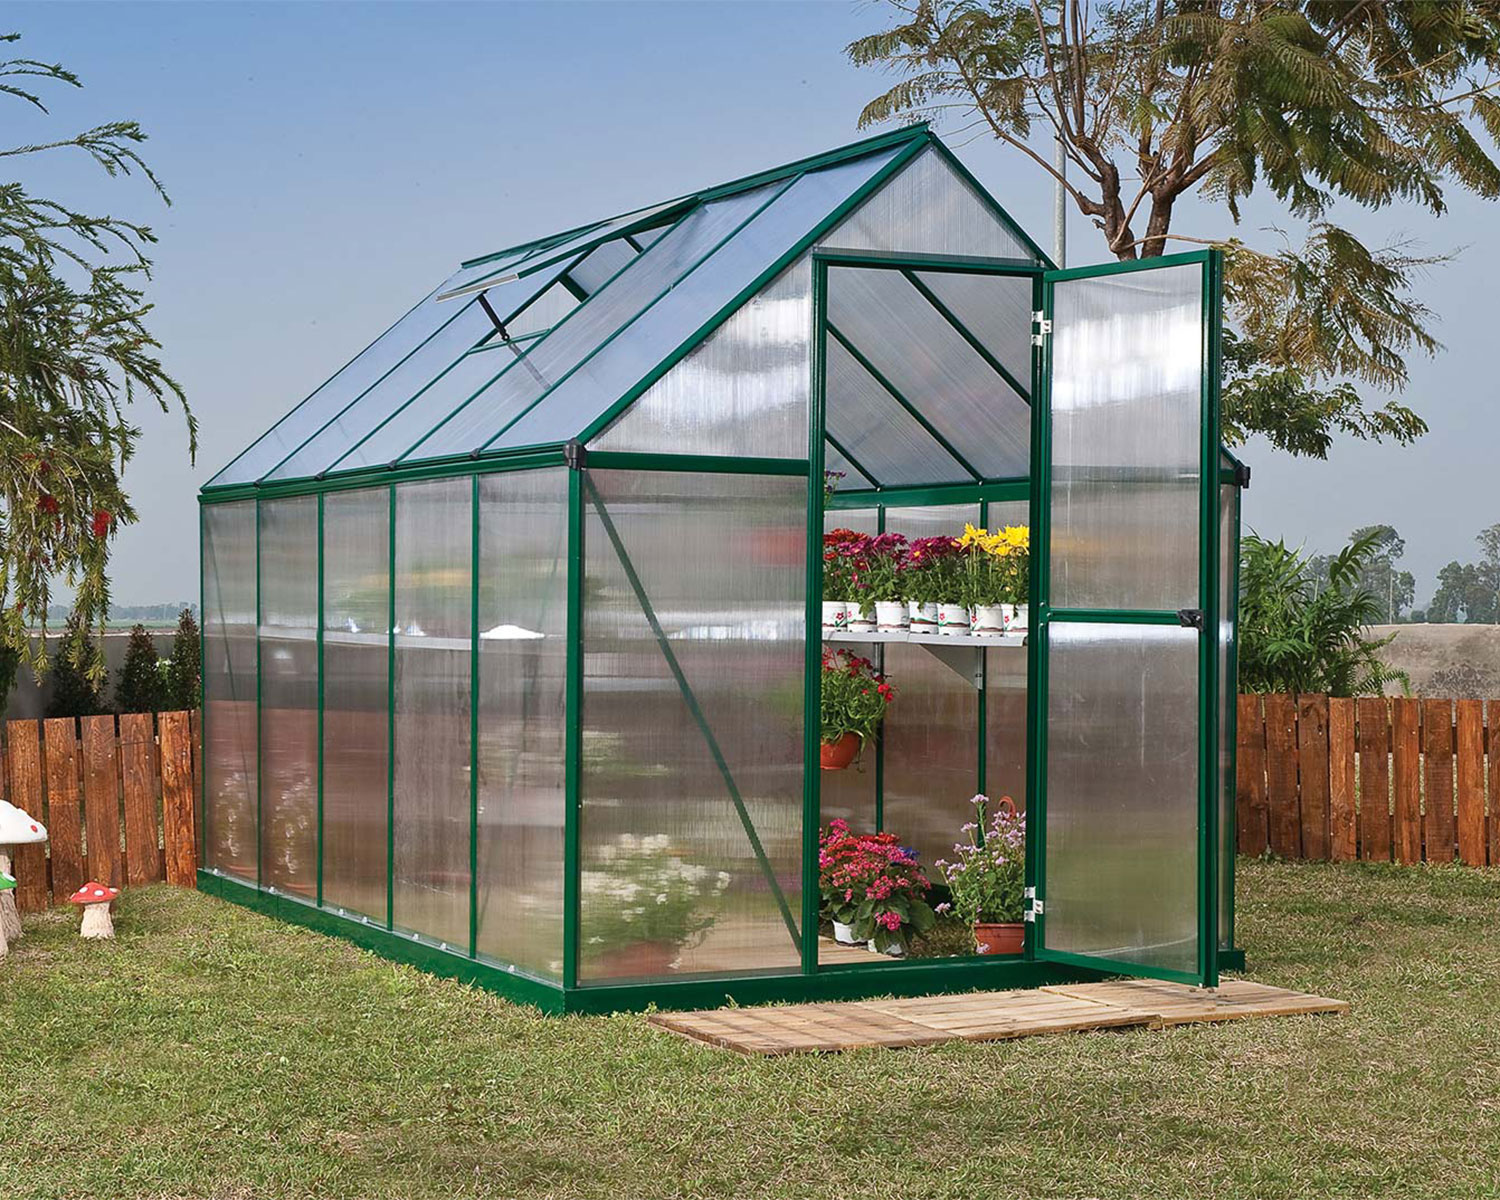 Mythos 6 ft. x 10 ft. Greenhouse Grey Structure &amp; Twinwall Panels on beckyard lawn